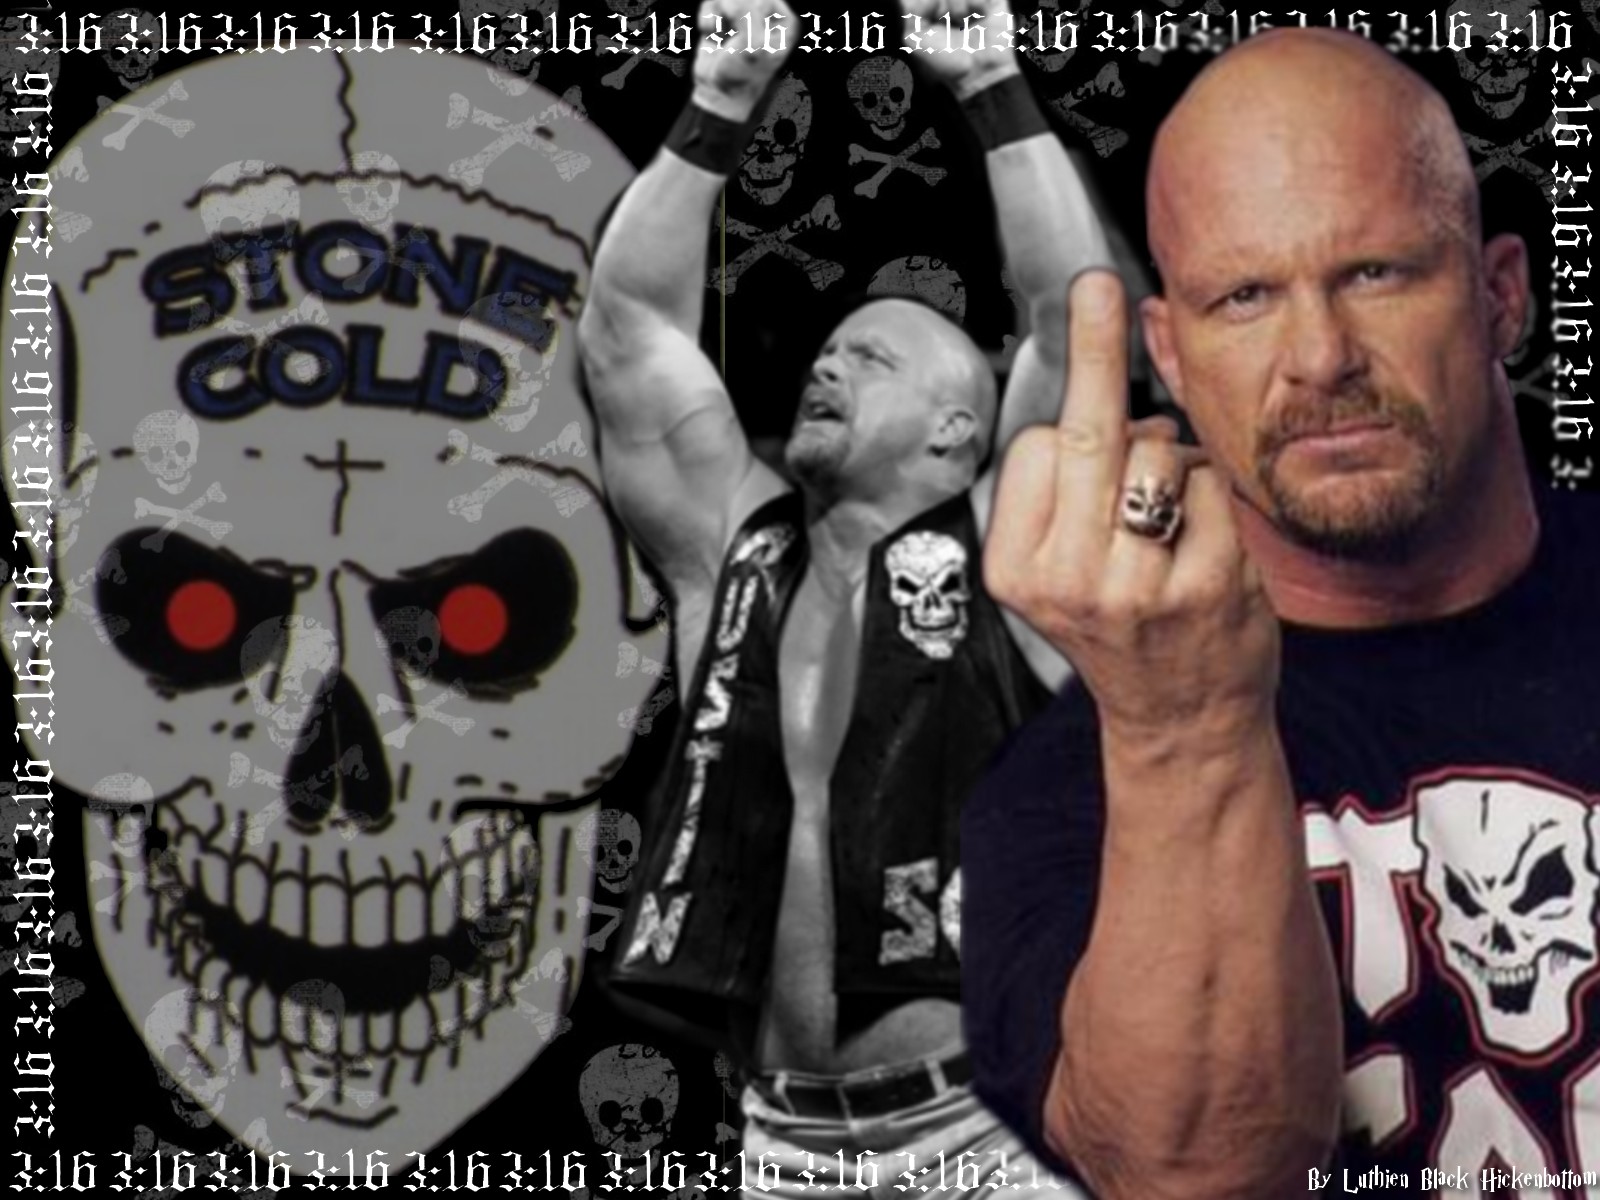 Stone Cold Steve Austin Wallpapers | Latest Updates About Technology ...